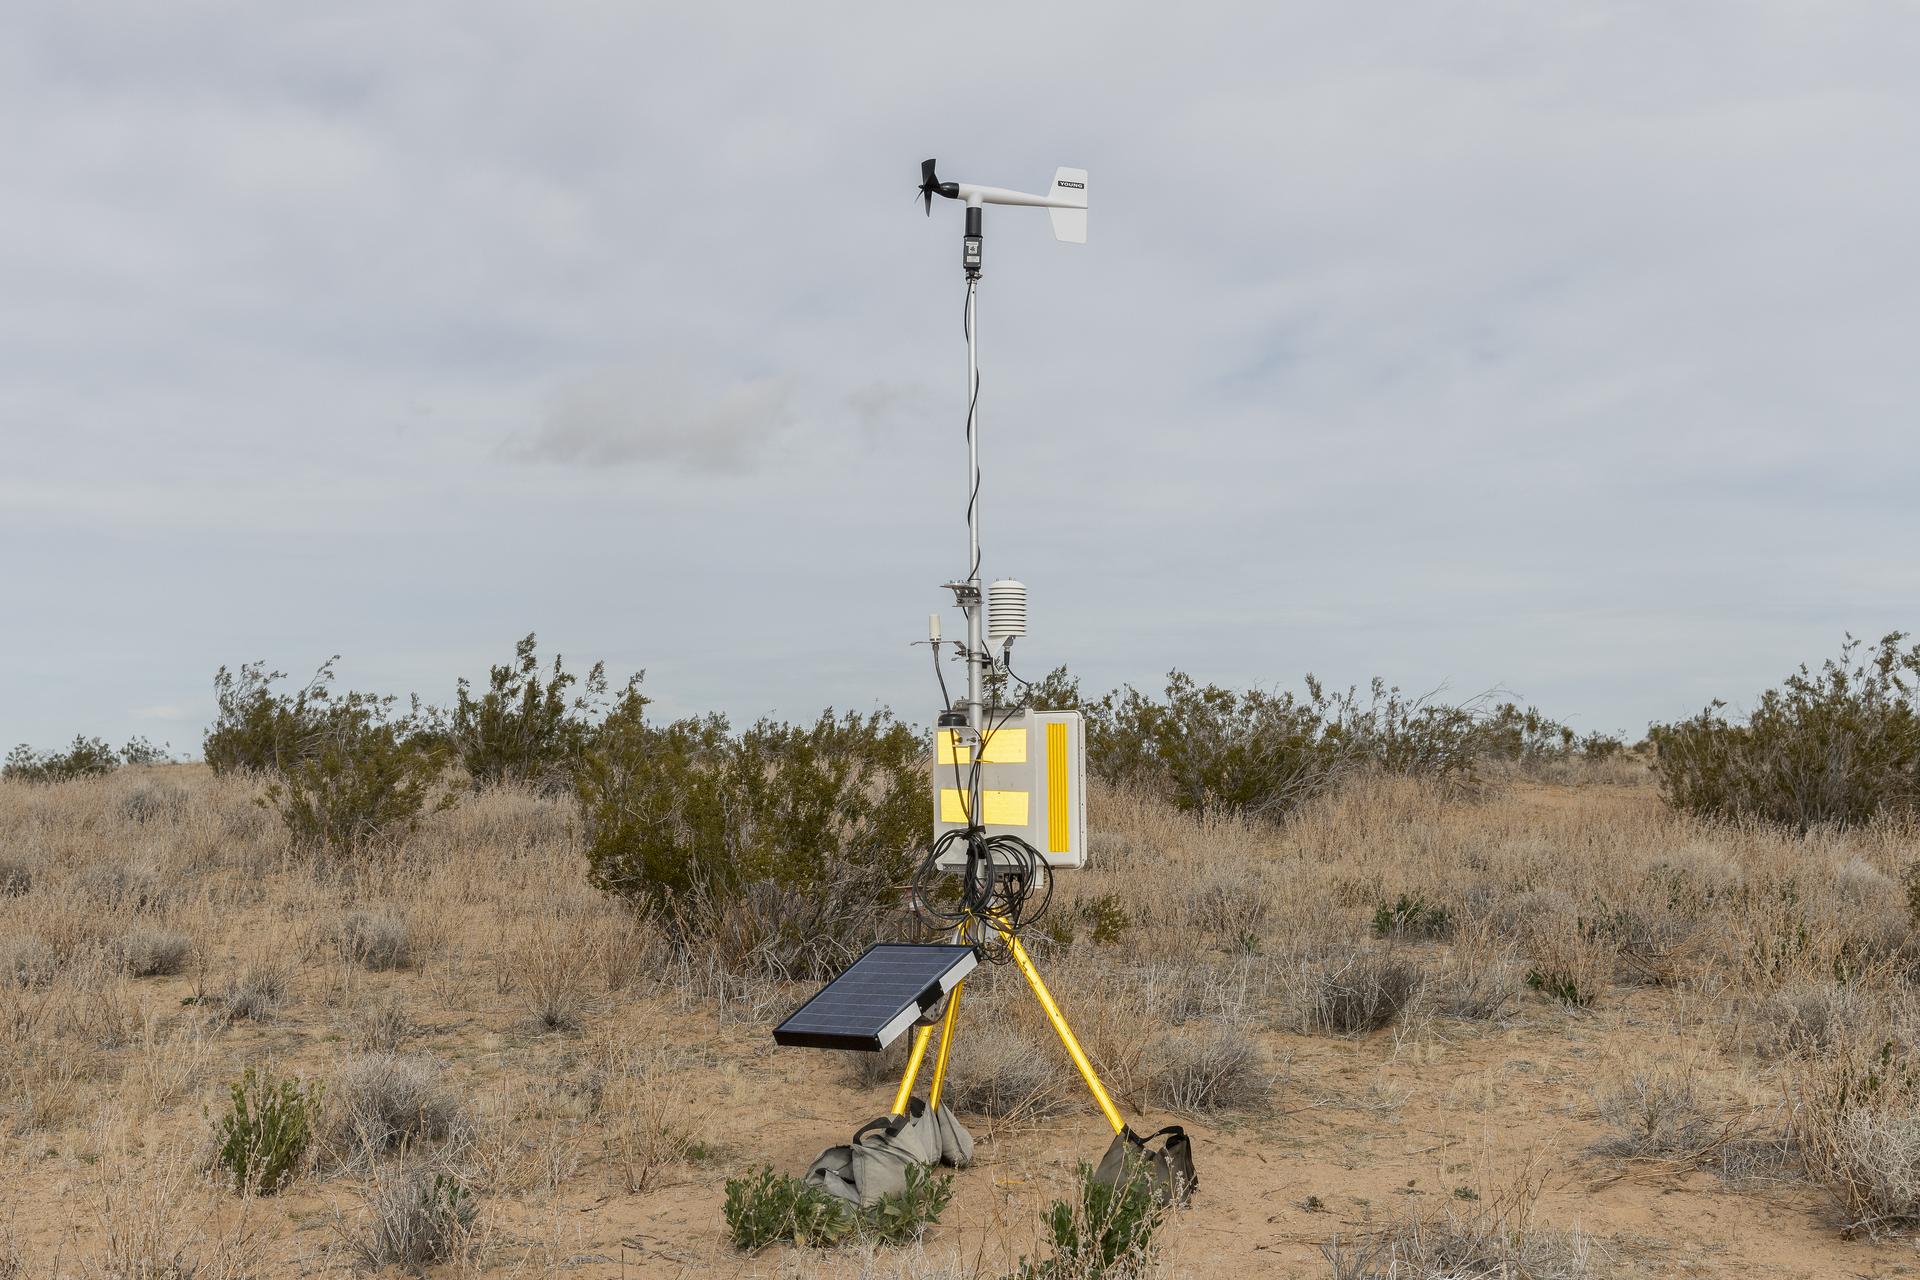 microphones and wind gauges connected to solar panels in the desert